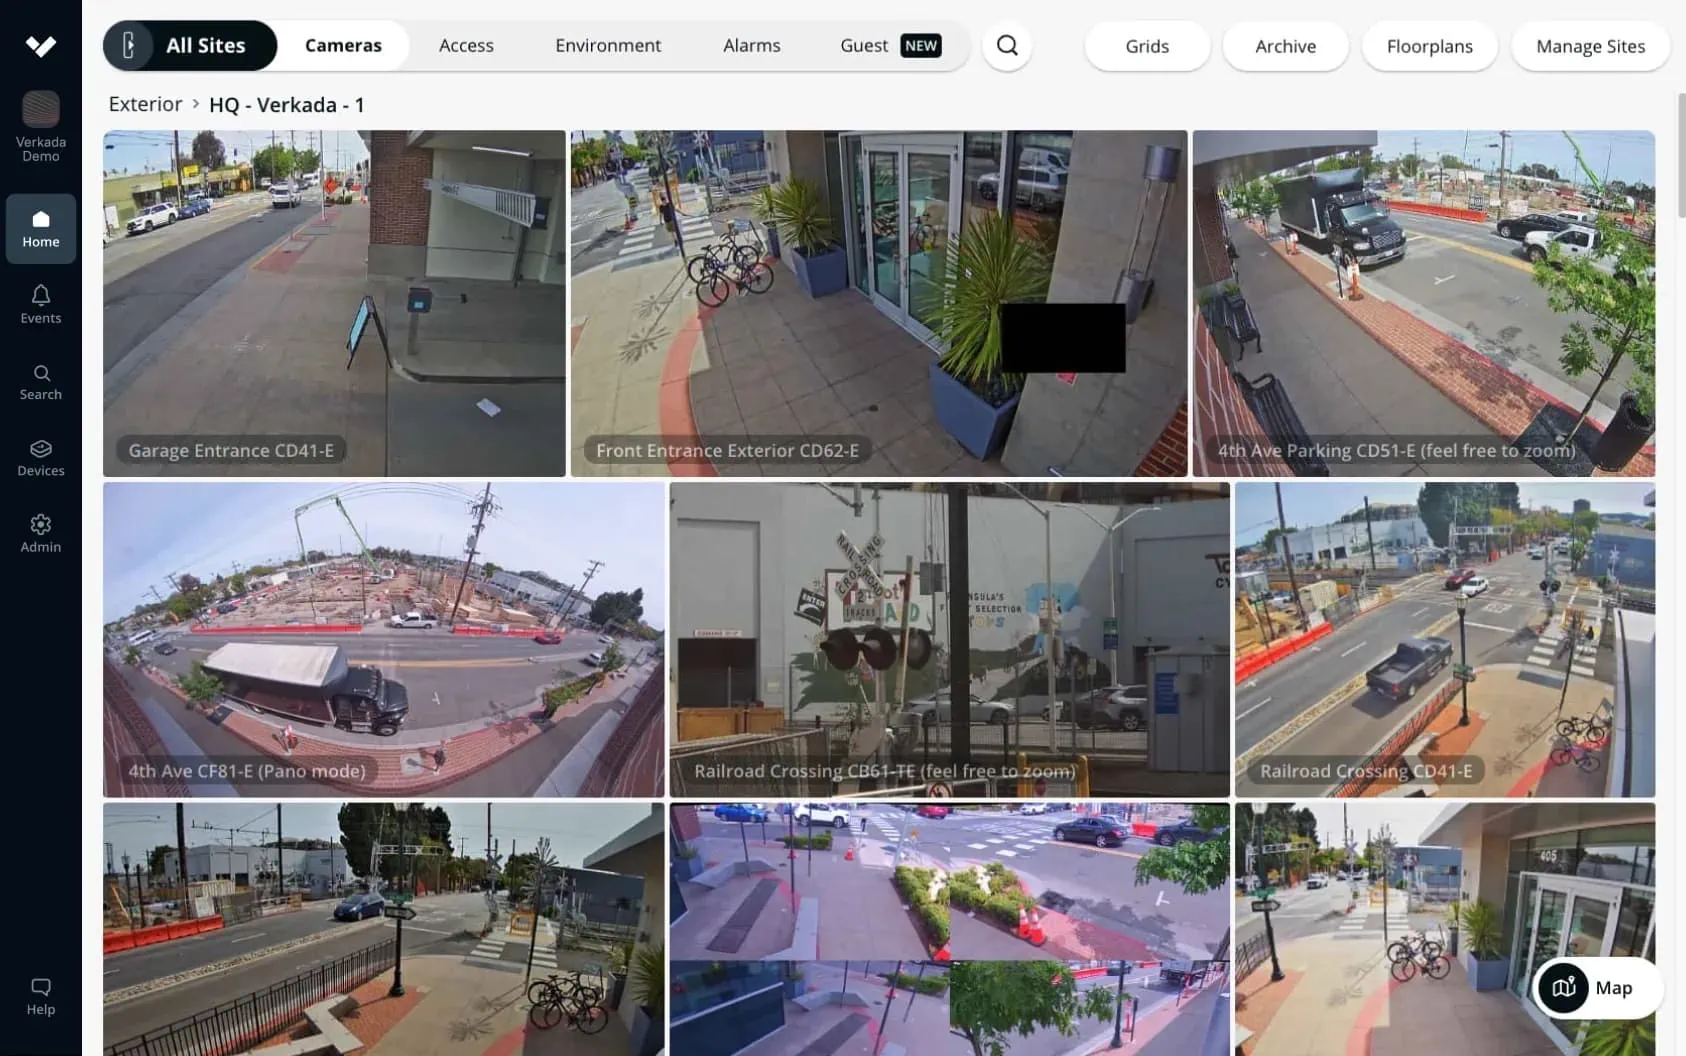 Command interface displaying boxes of footage captured by different security cameras with cloud storage